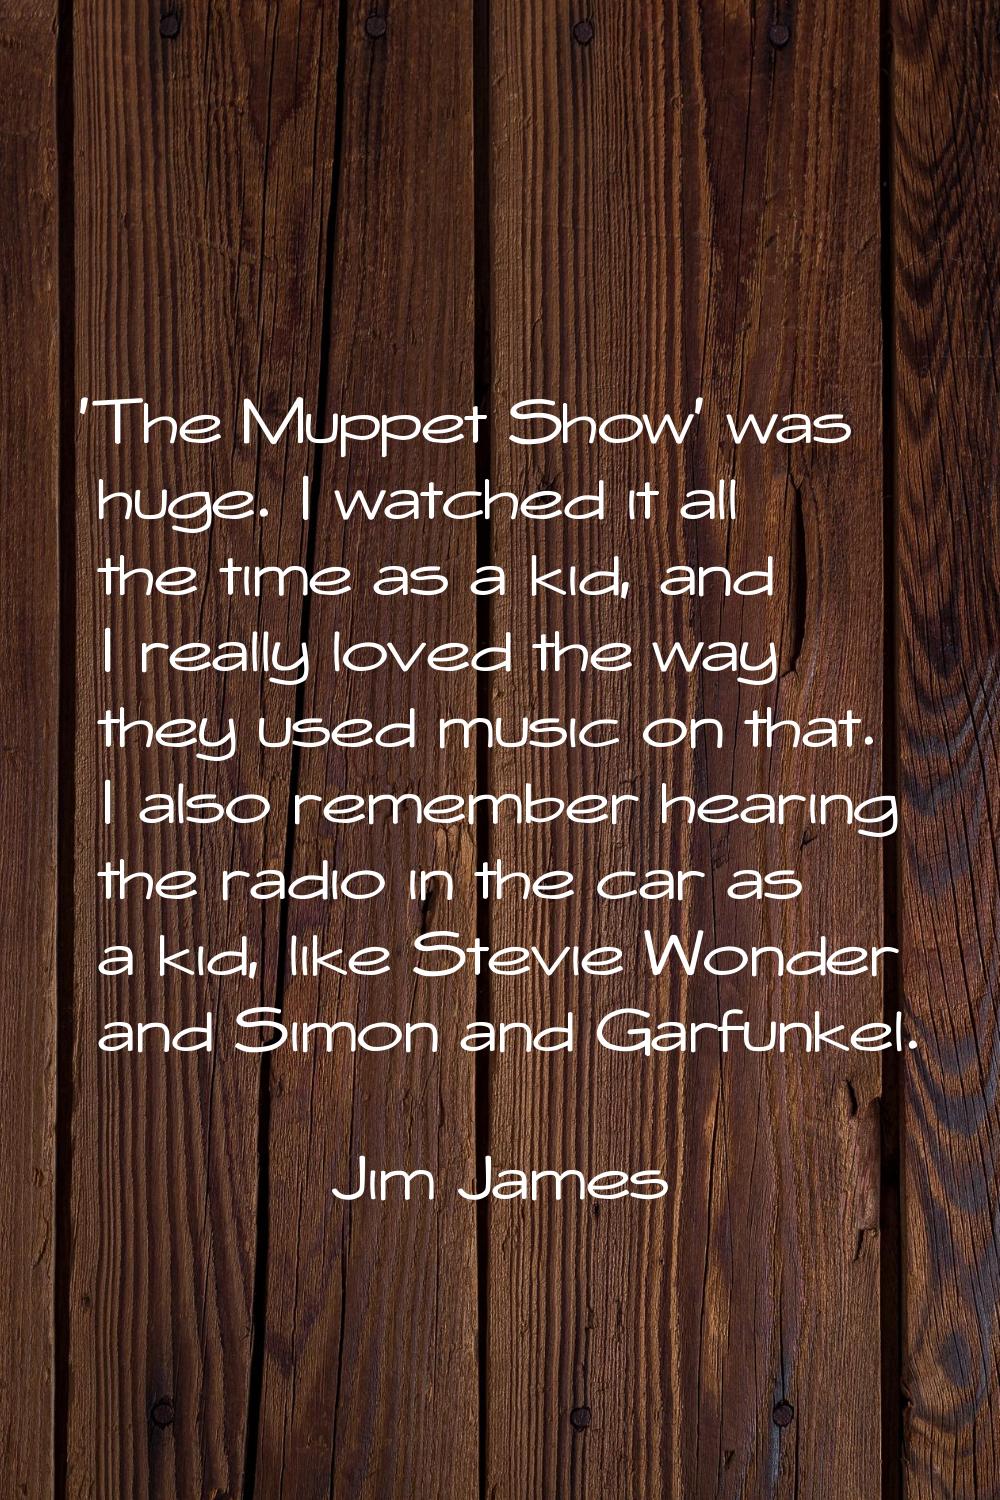 'The Muppet Show' was huge. I watched it all the time as a kid, and I really loved the way they use